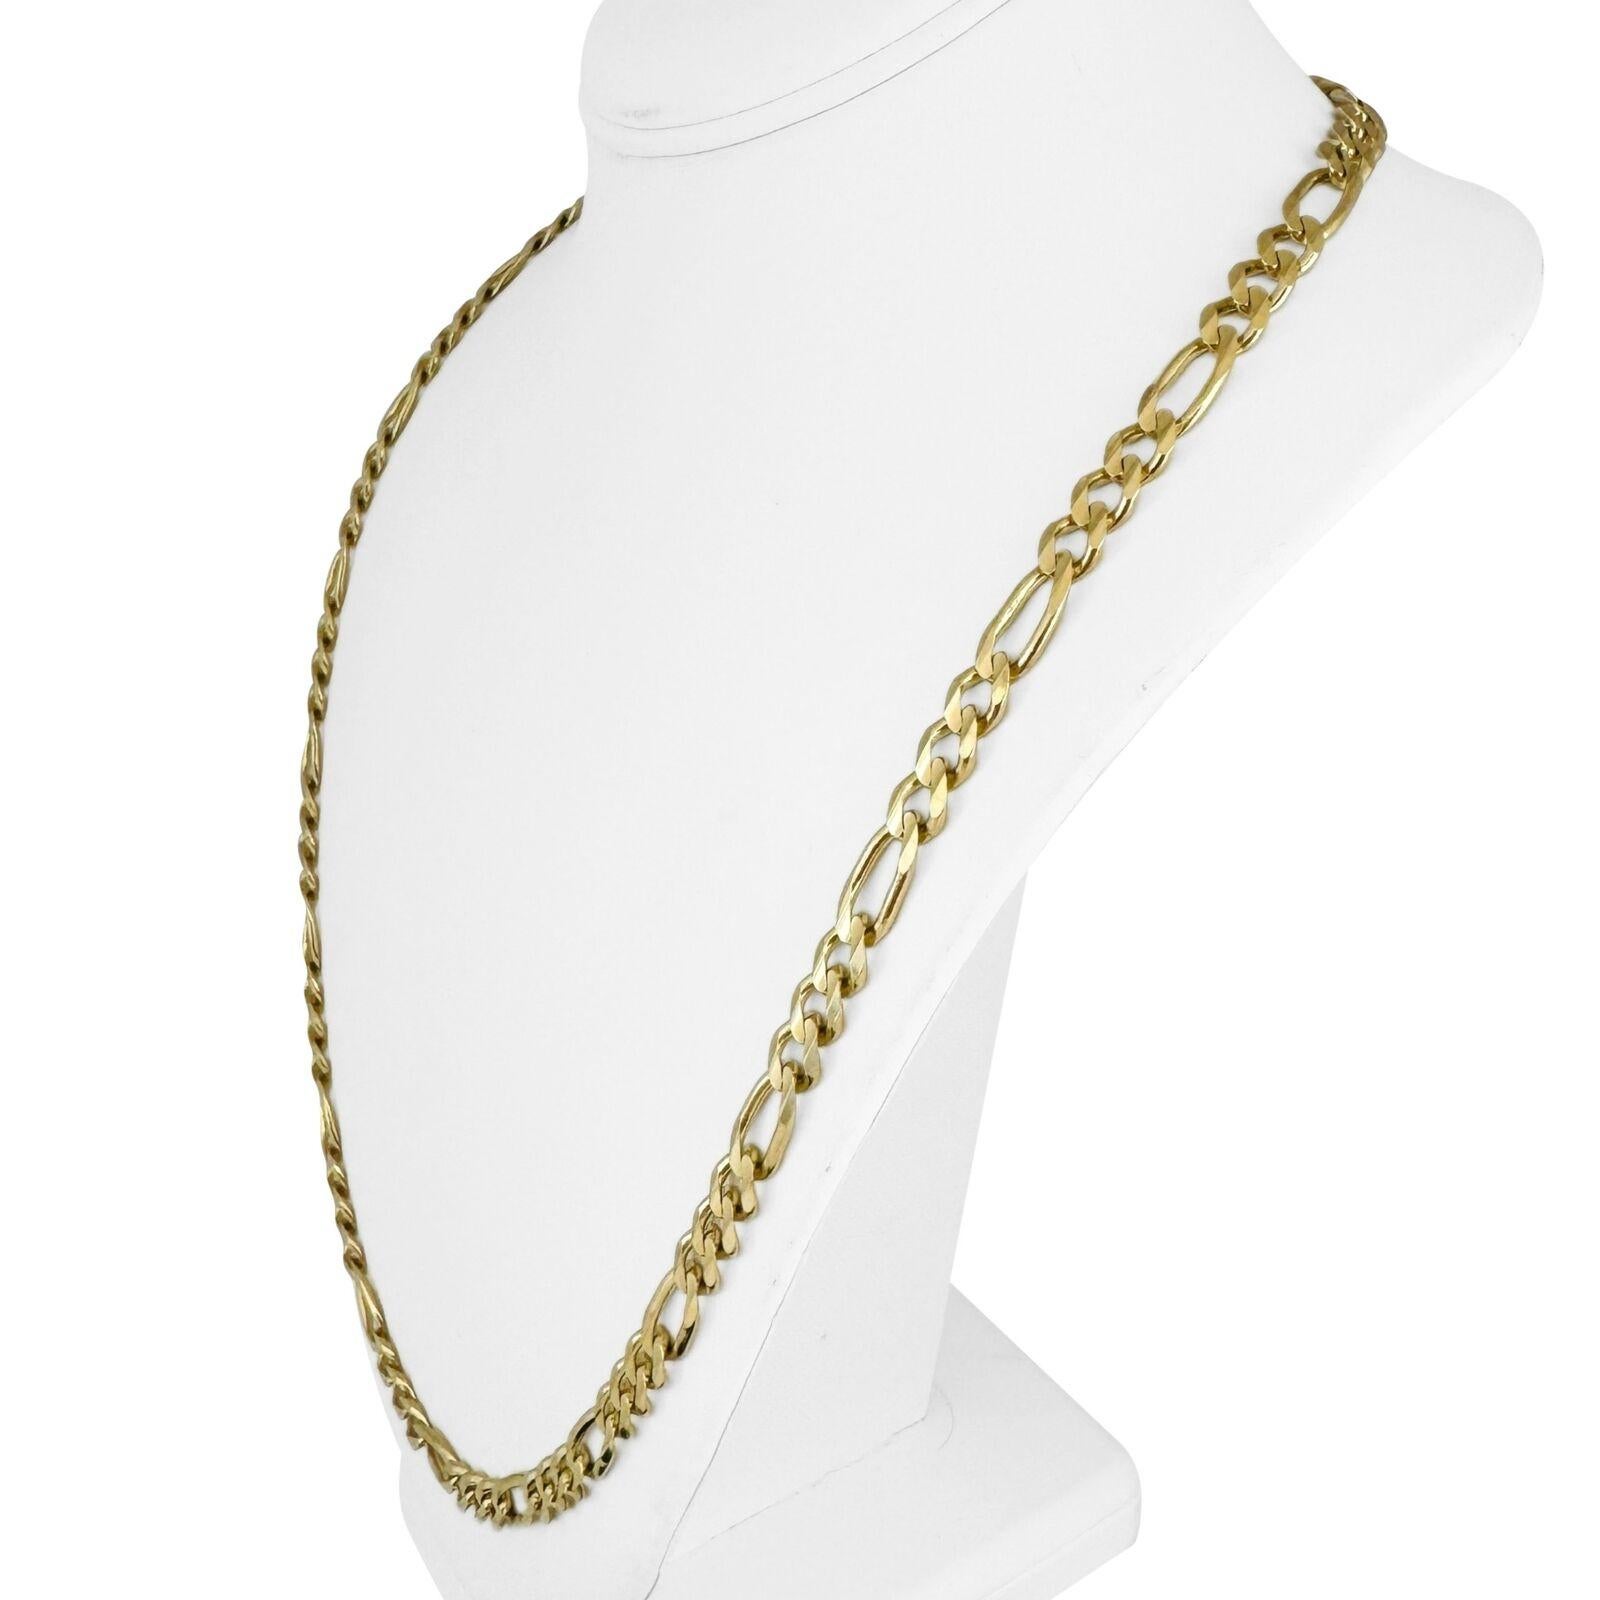 14k Yellow Gold 45.6g Solid Men's 6.5mm Figaro Link Chain Necklace Italy 26